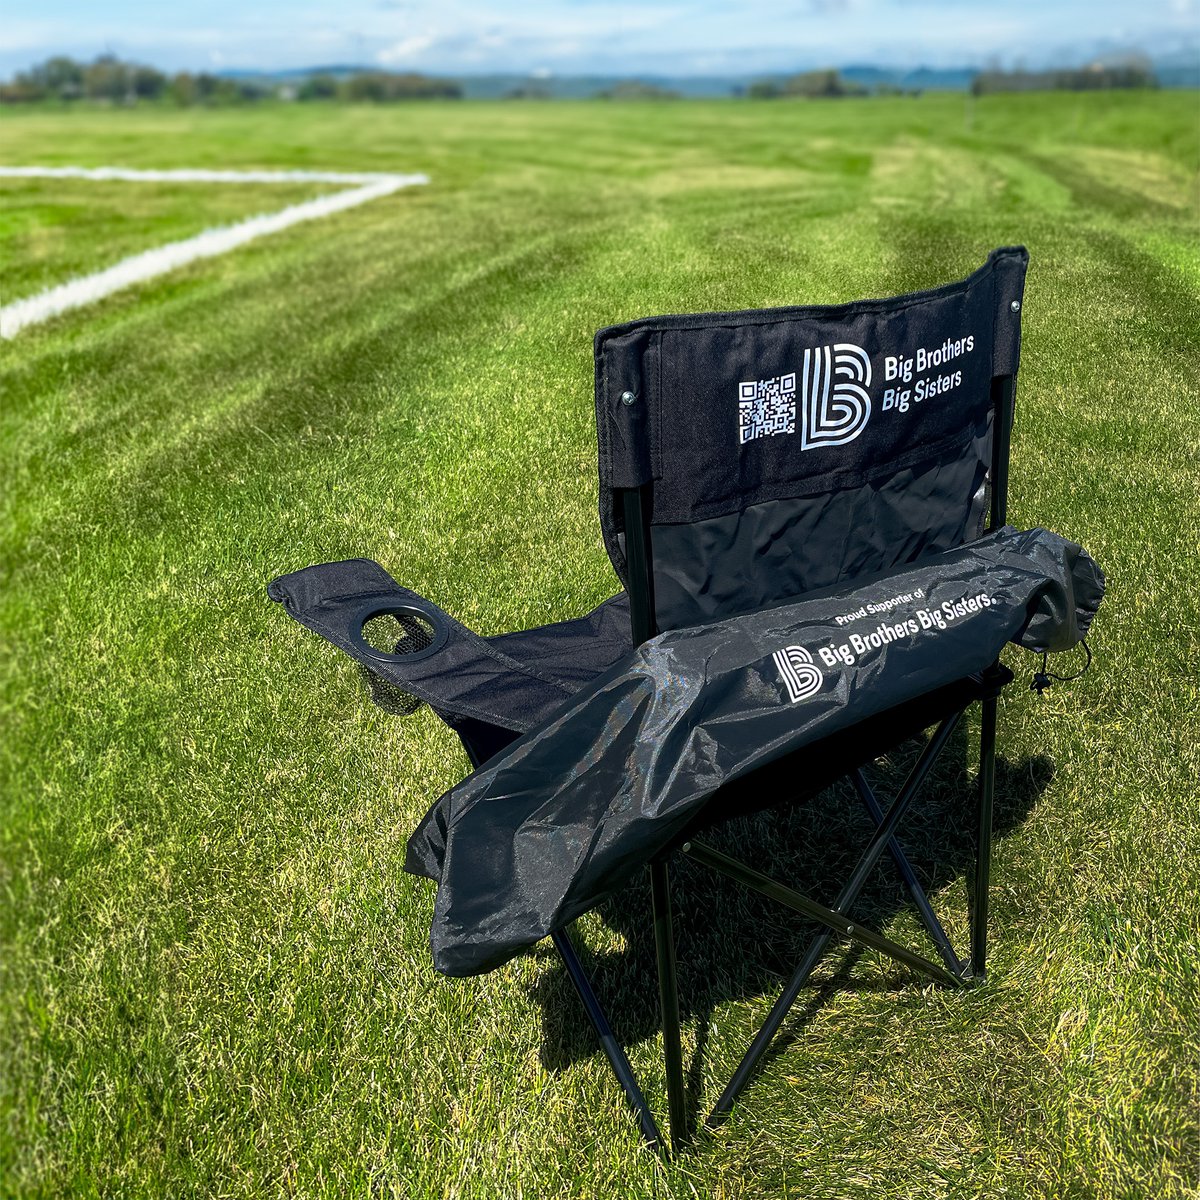 These lawn chairs for @BBBSNEI were a hit! With a large imprint area on the back of the chair and on the carrying bag, it's the perfect giveaway item. #promotionalproductswork